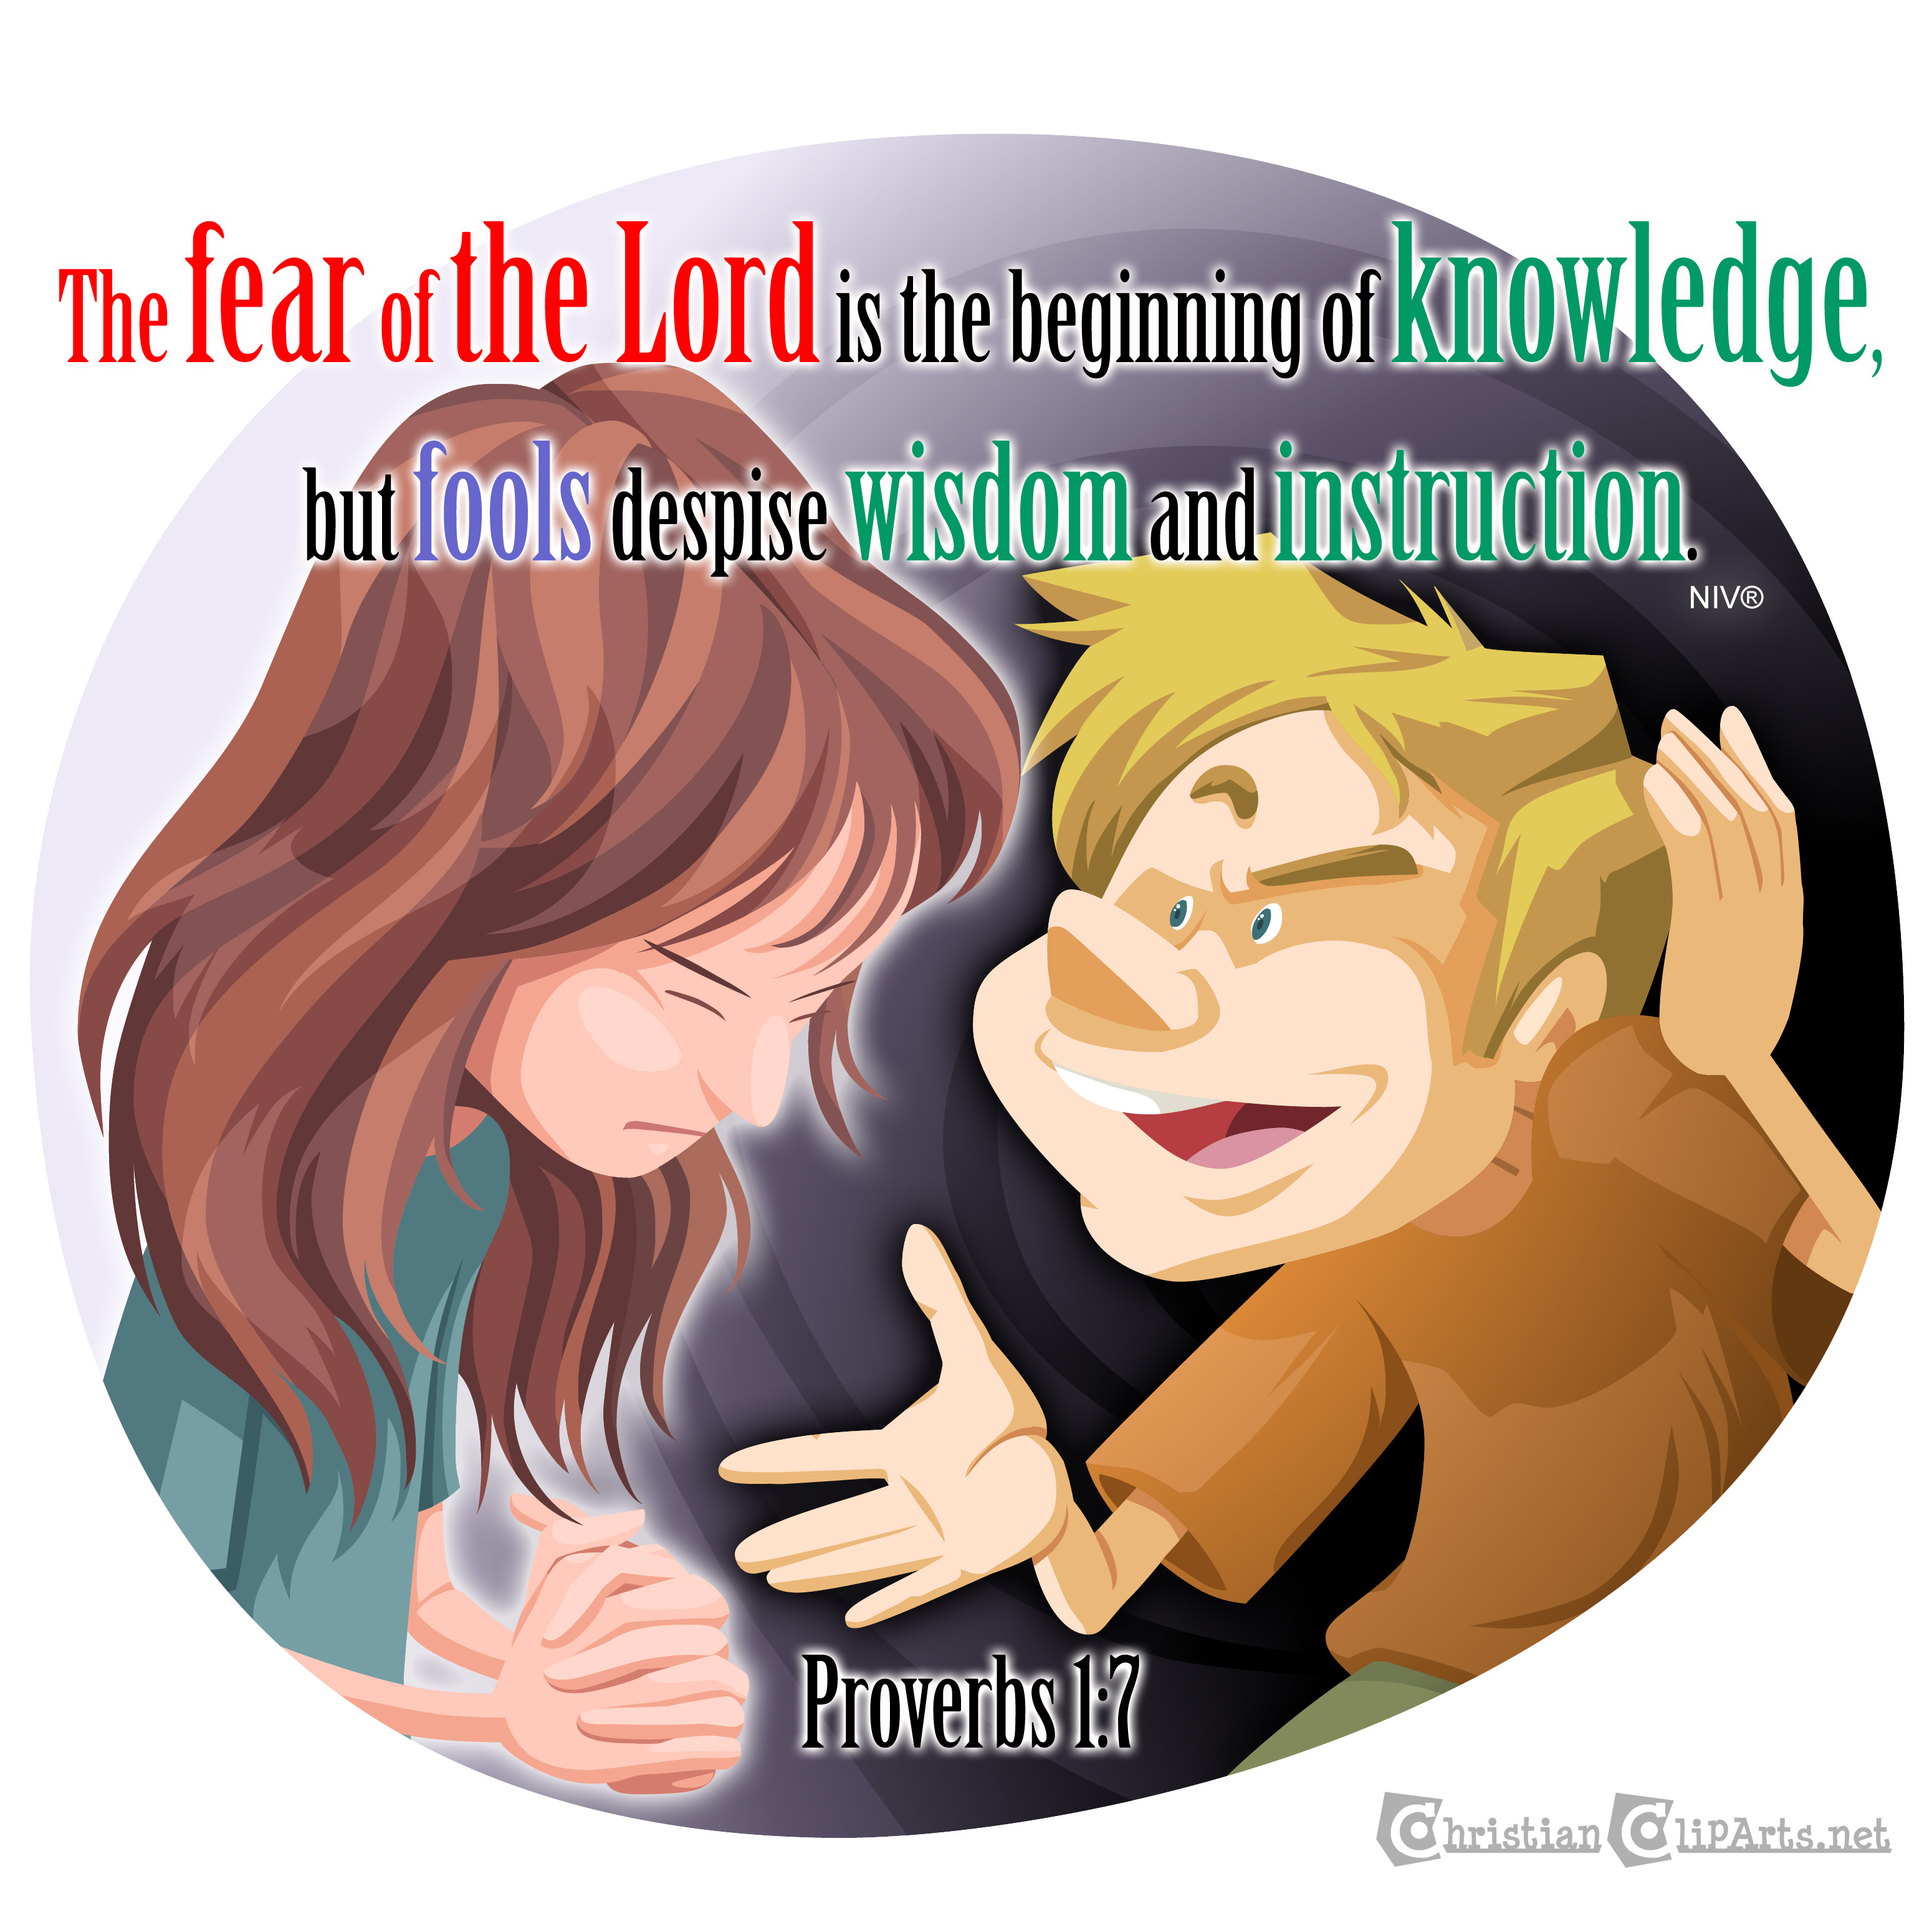 The fear of the Lord